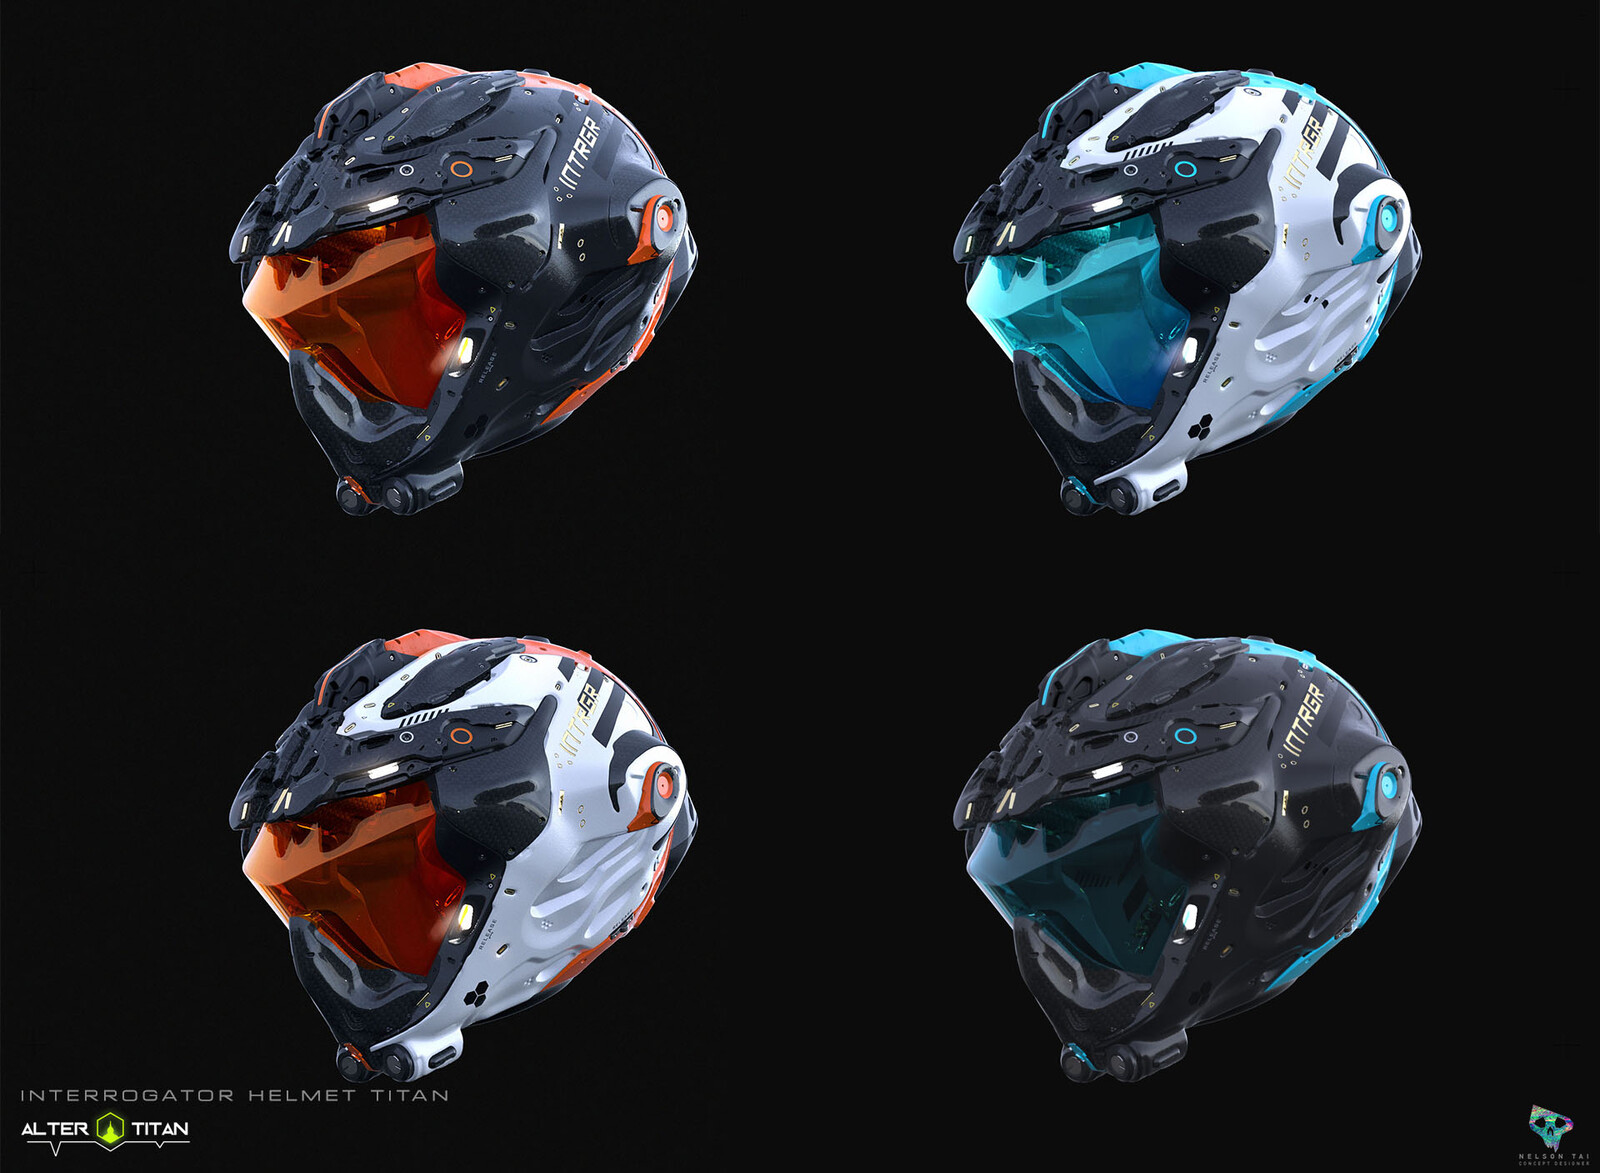 Color variations of the helmet